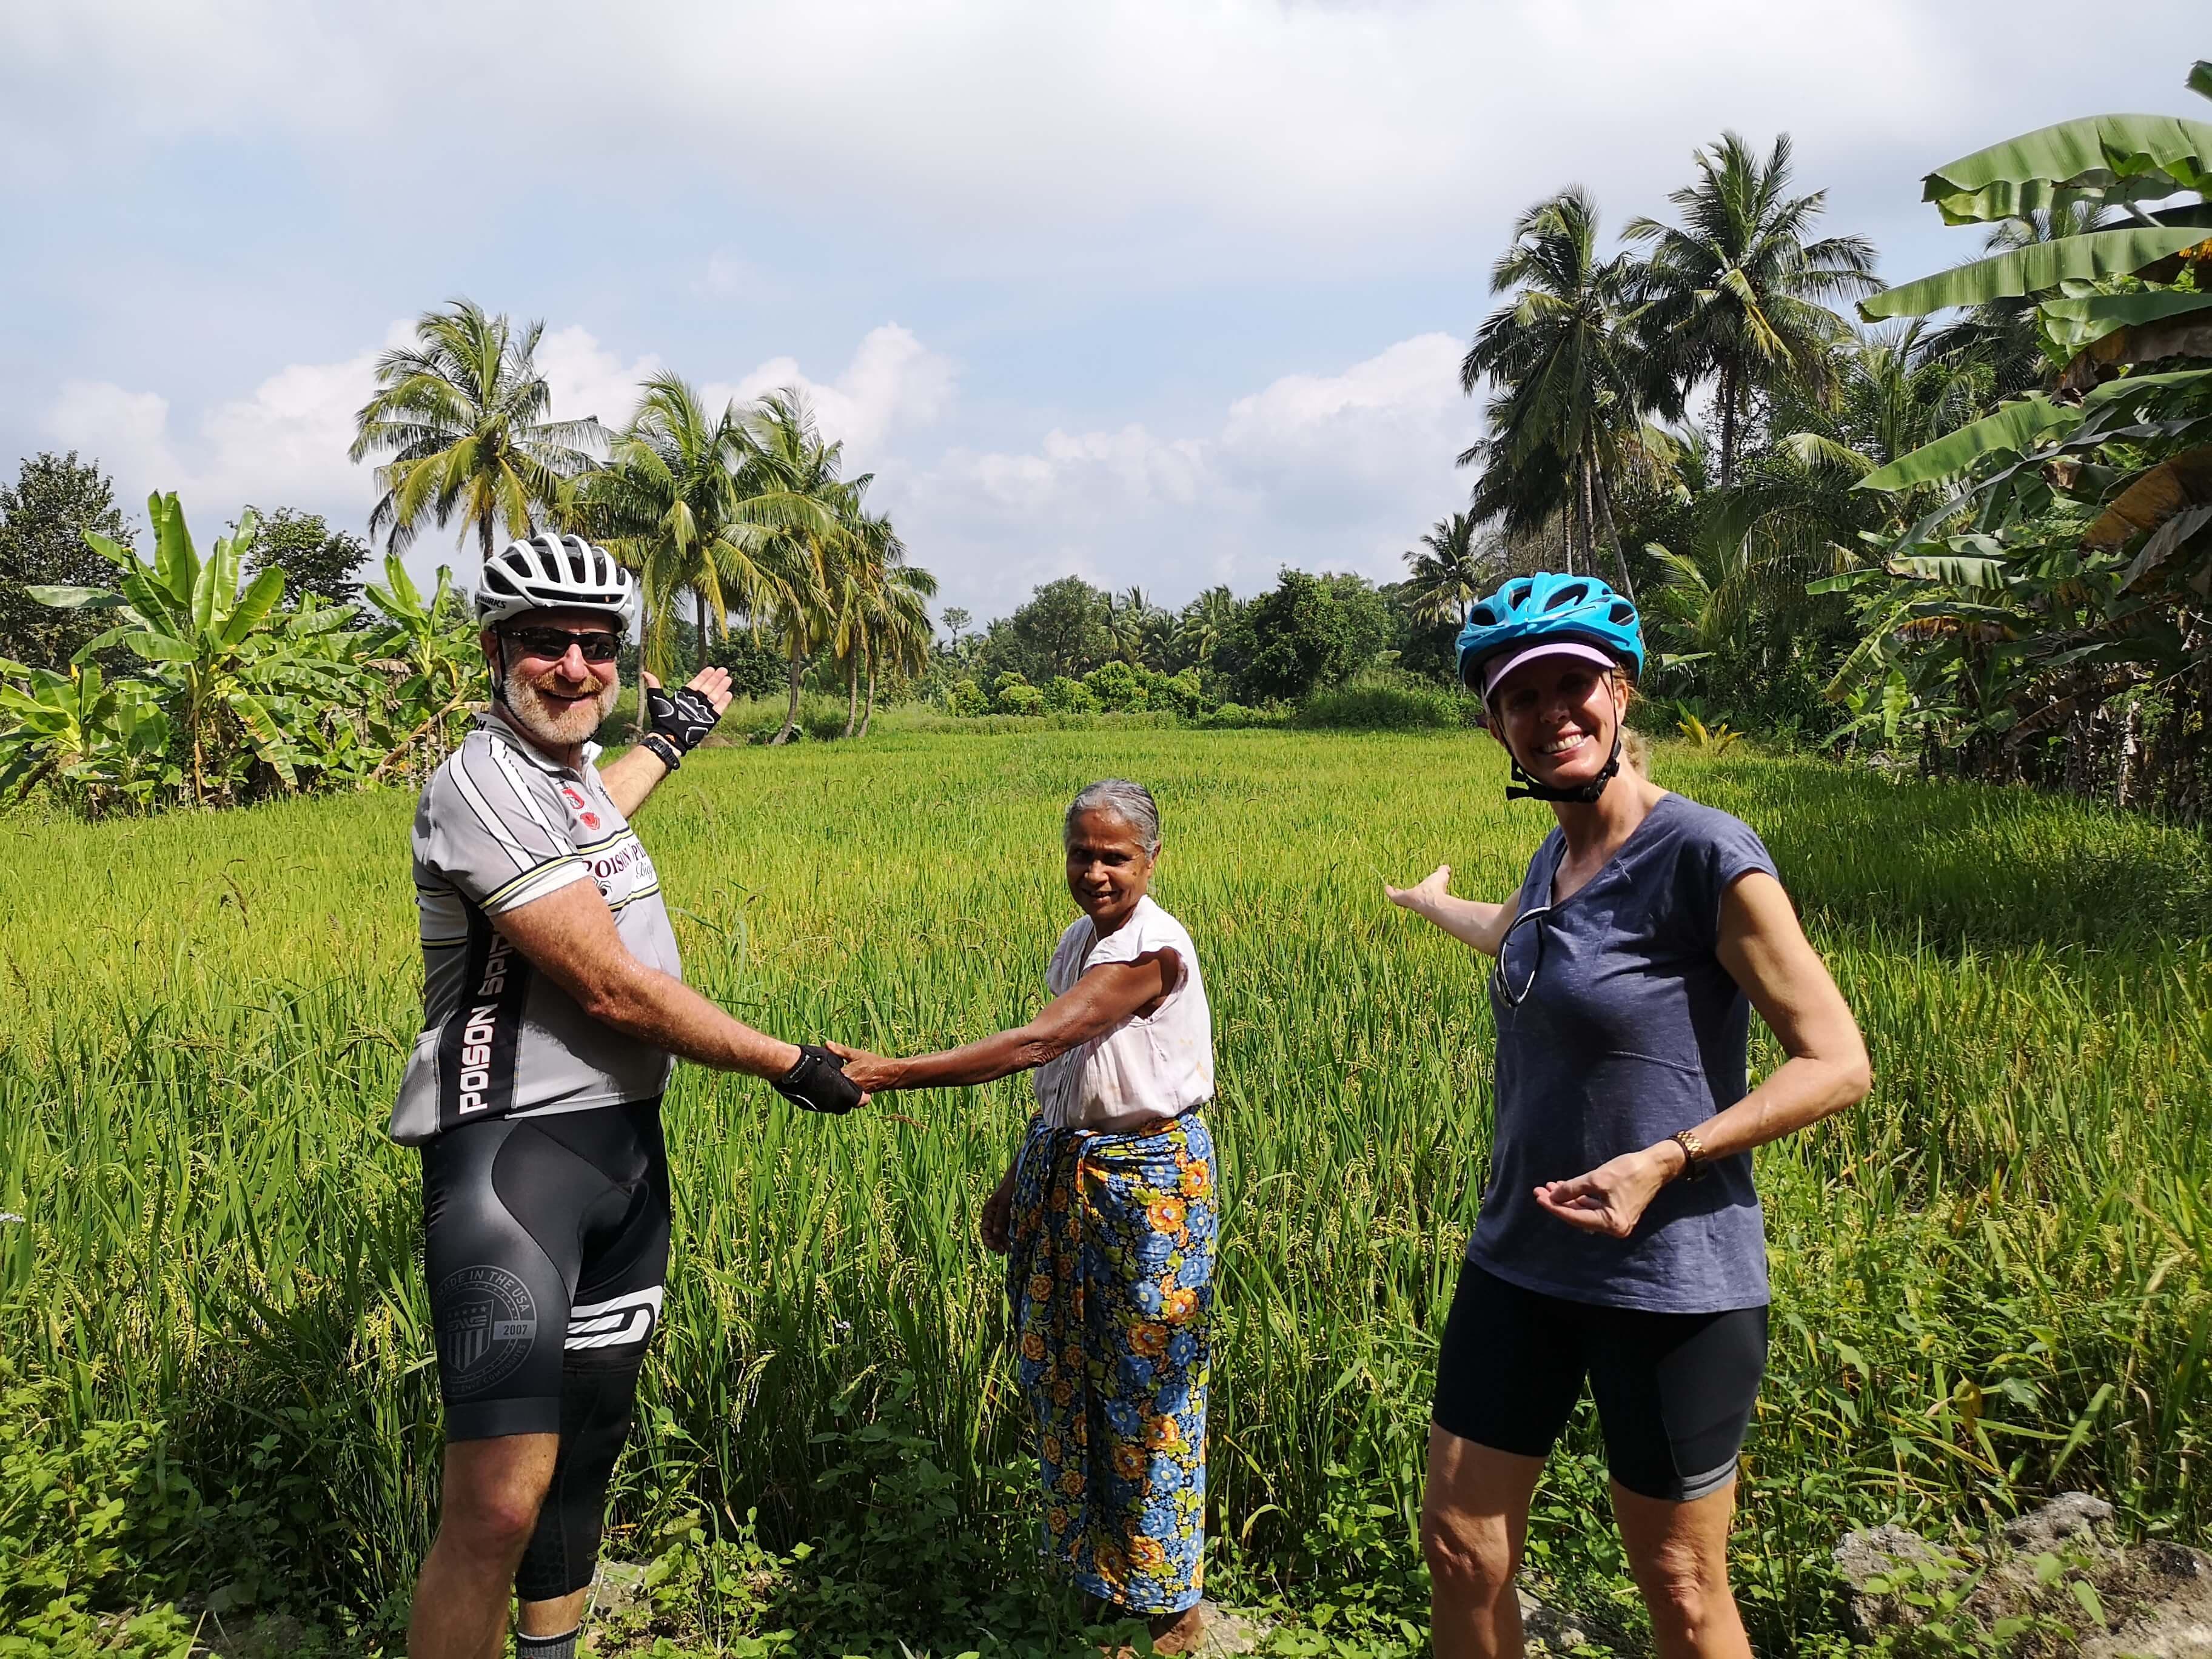 A photo of the cyclists watching a countryside paddy field with meeting local friendly people in Sri Lanka